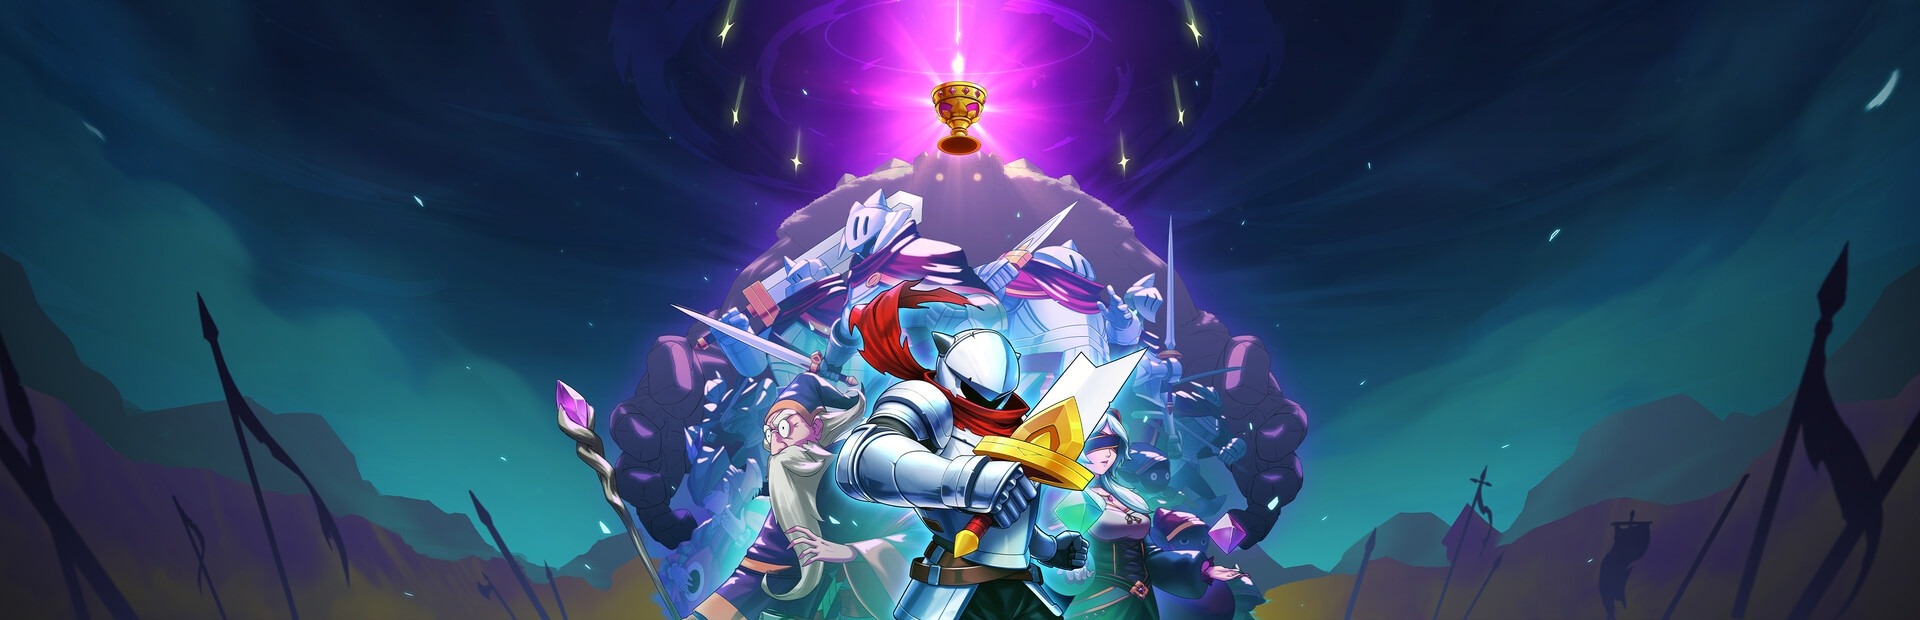 Knight vs Giant: The Broken Excalibur for apple download free